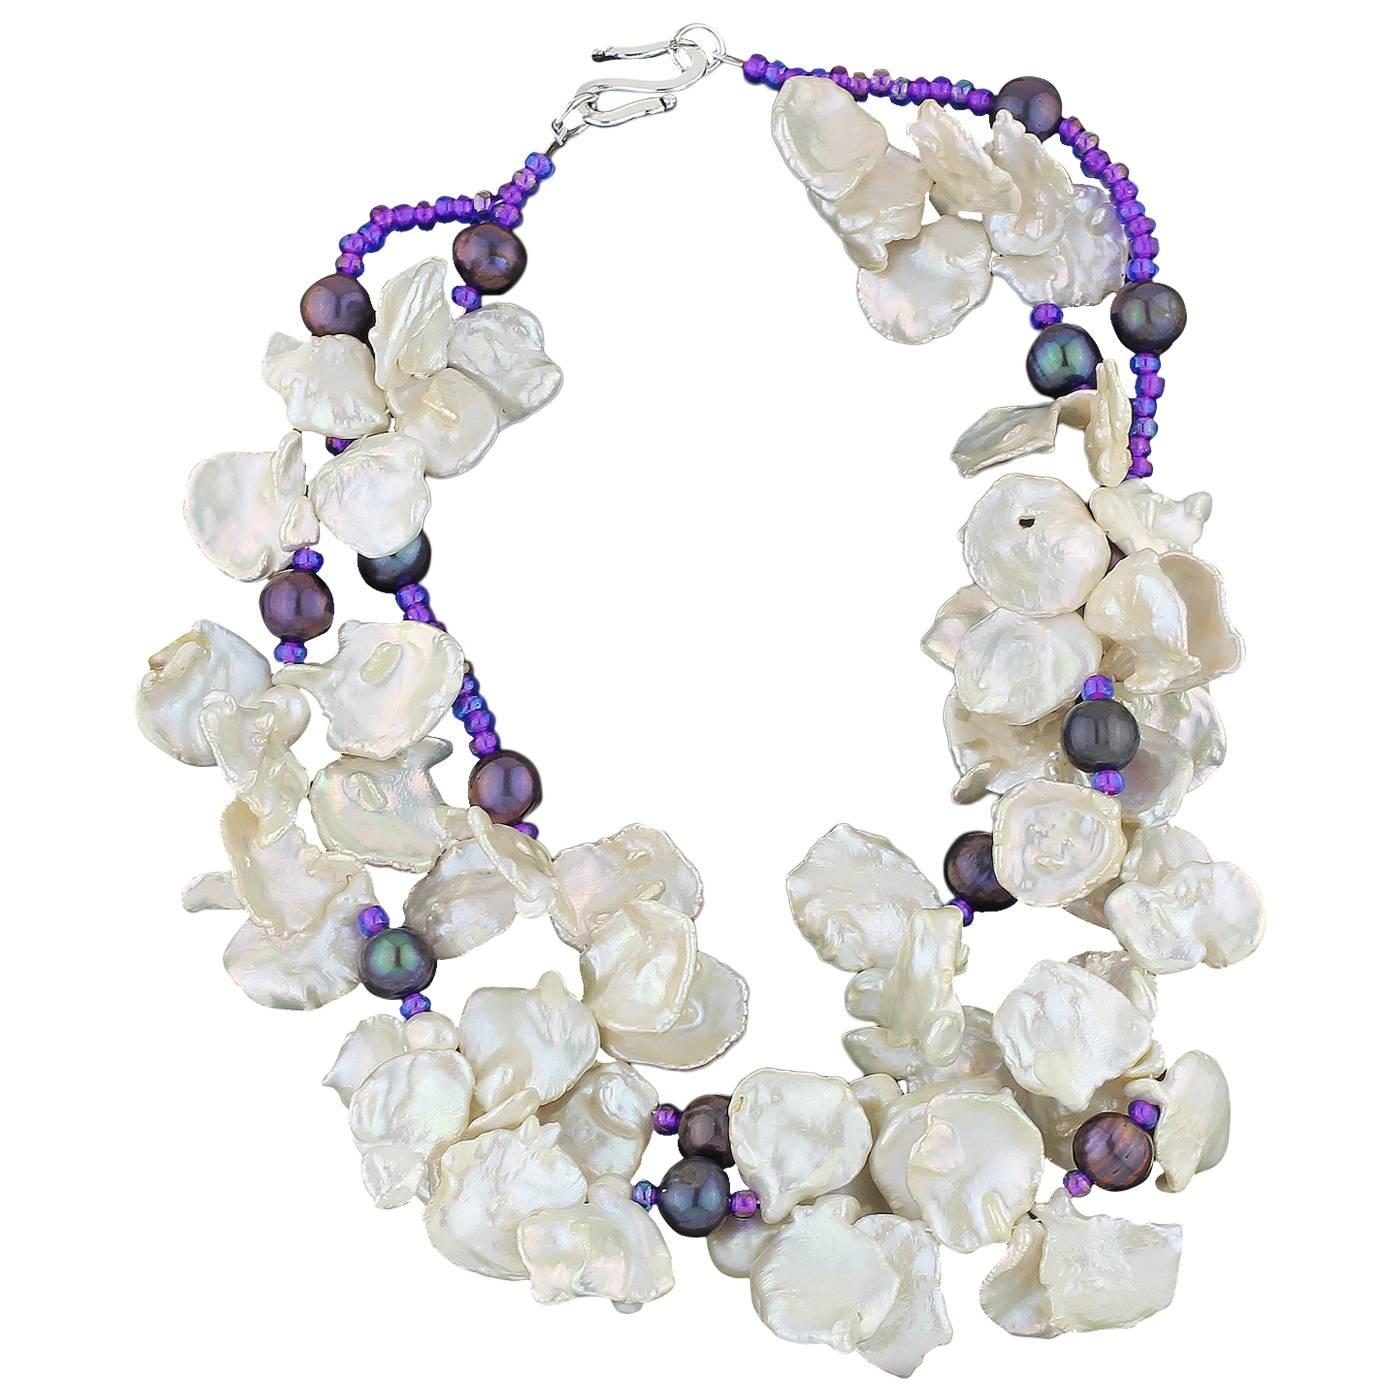 Keshi Pearls and Lavender Pearls Necklace